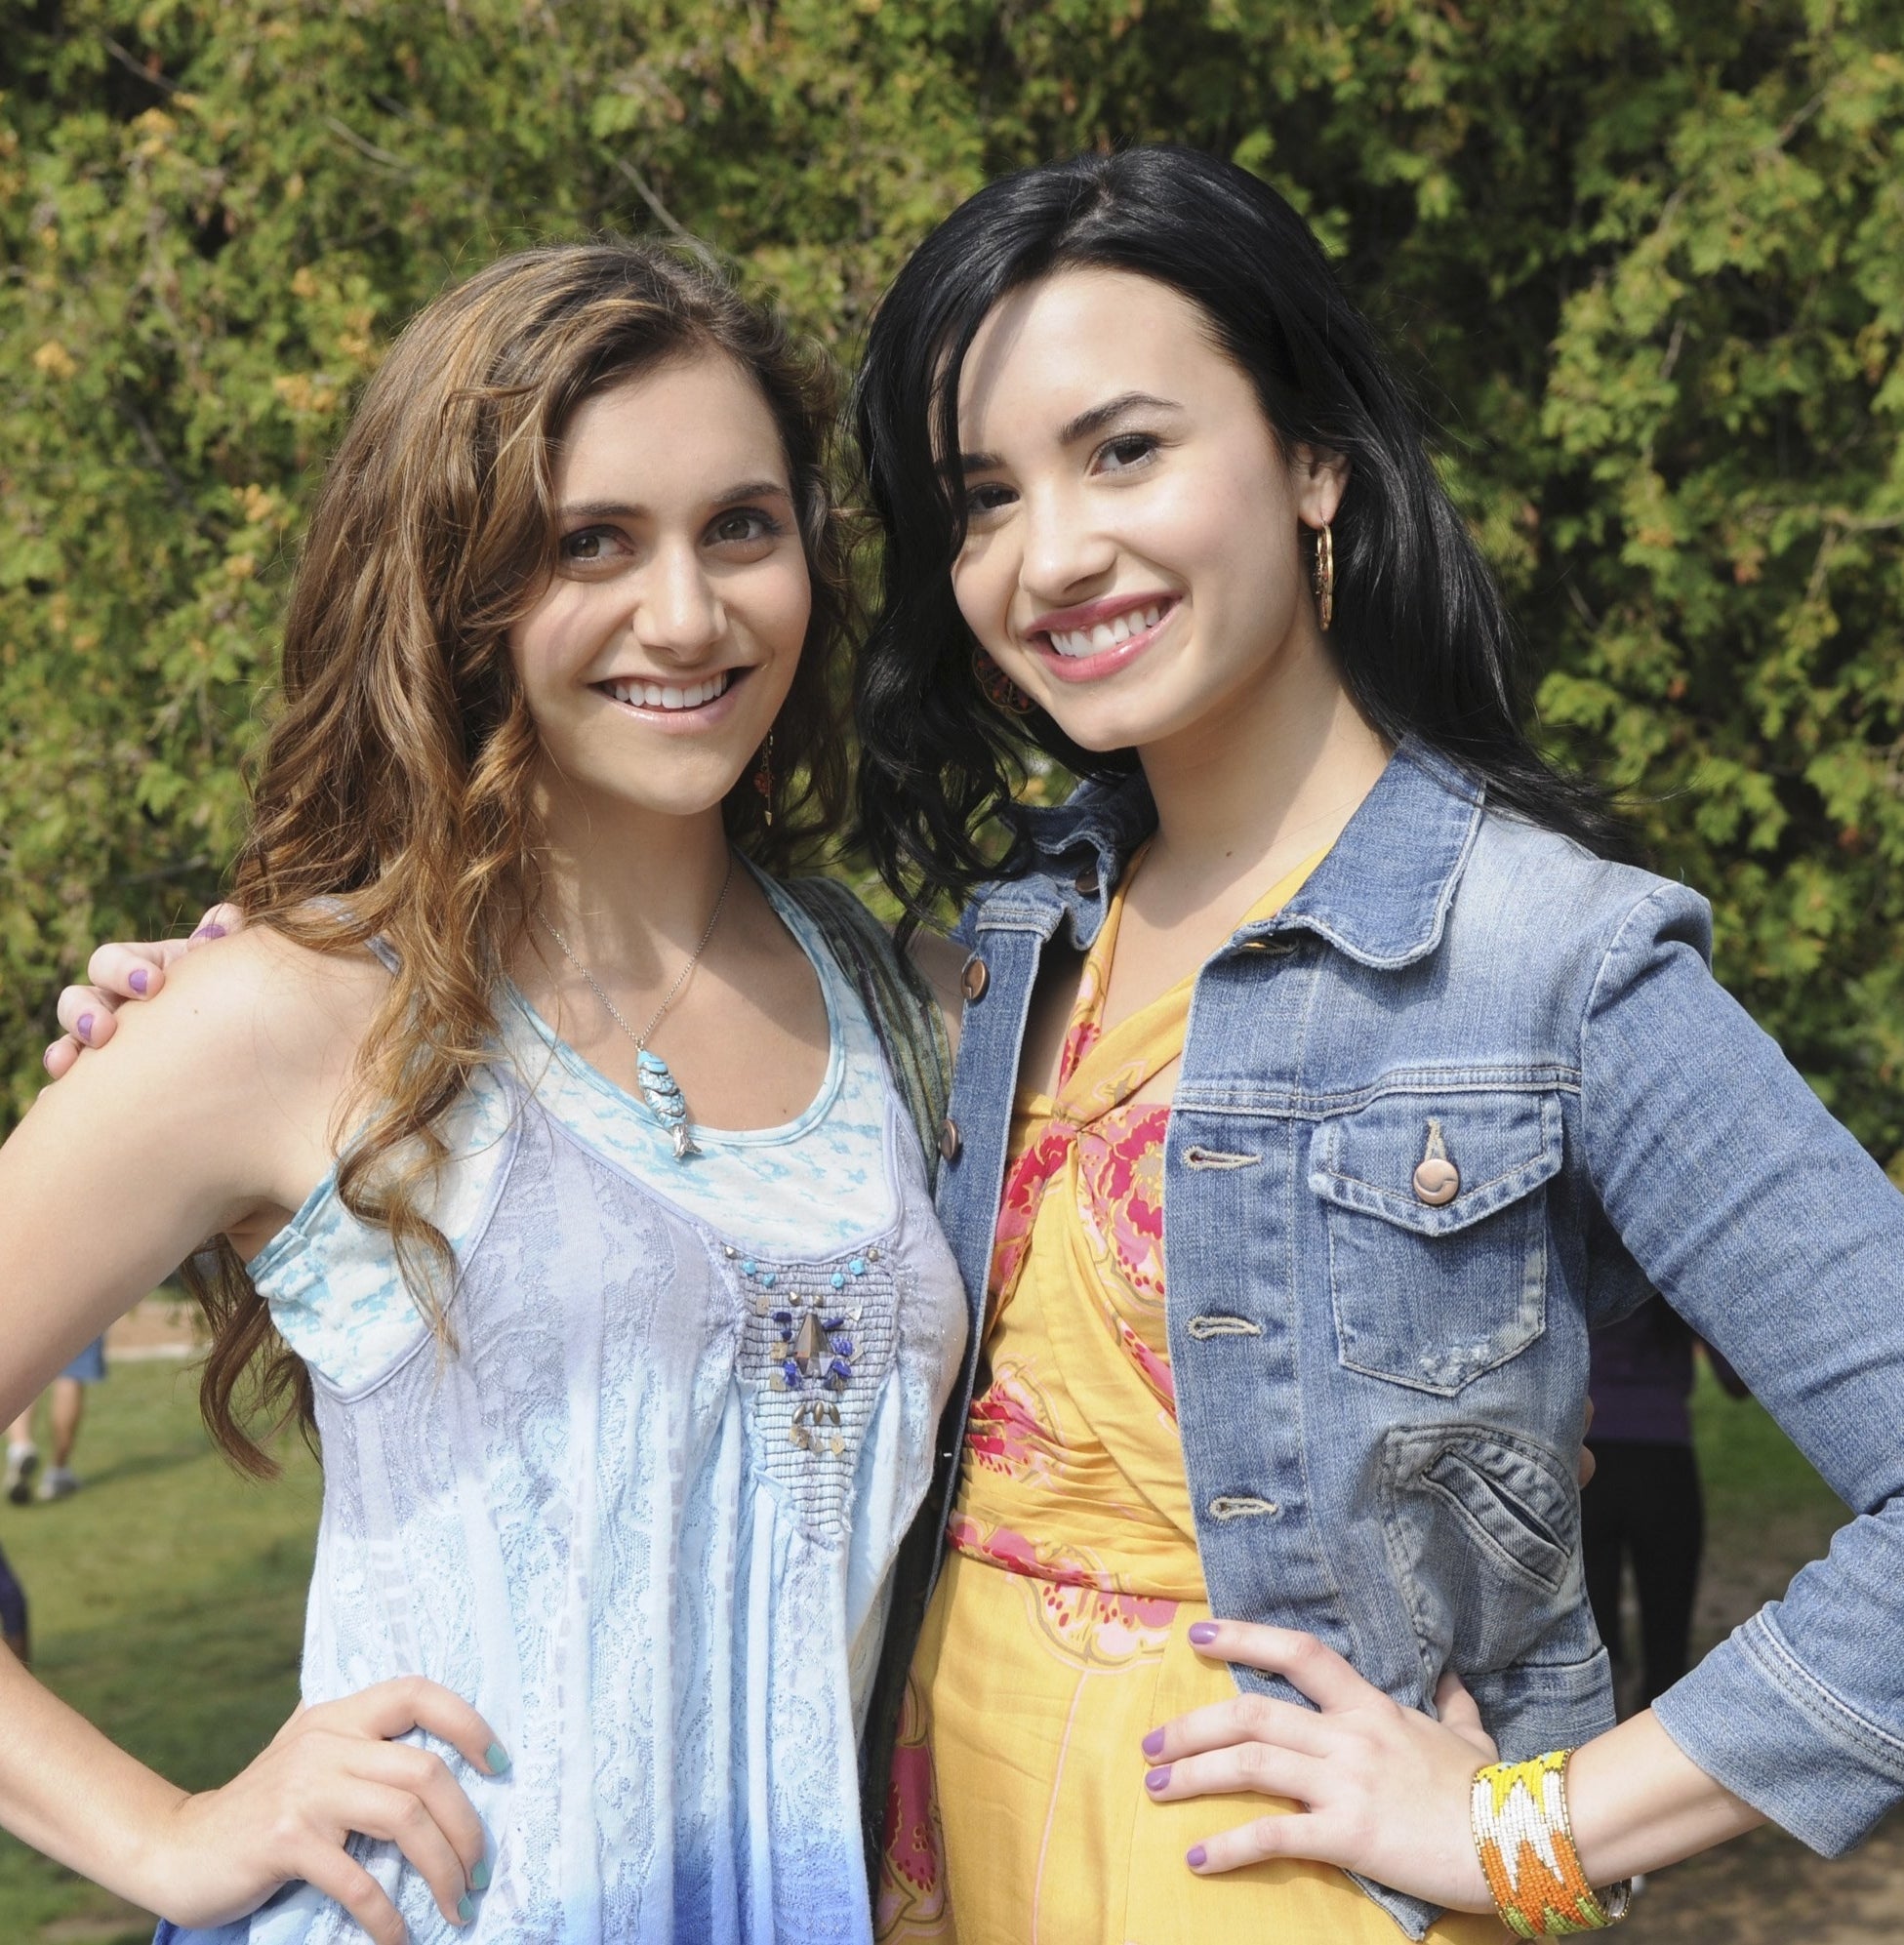 Alyson and Demi as children standing and smiling together